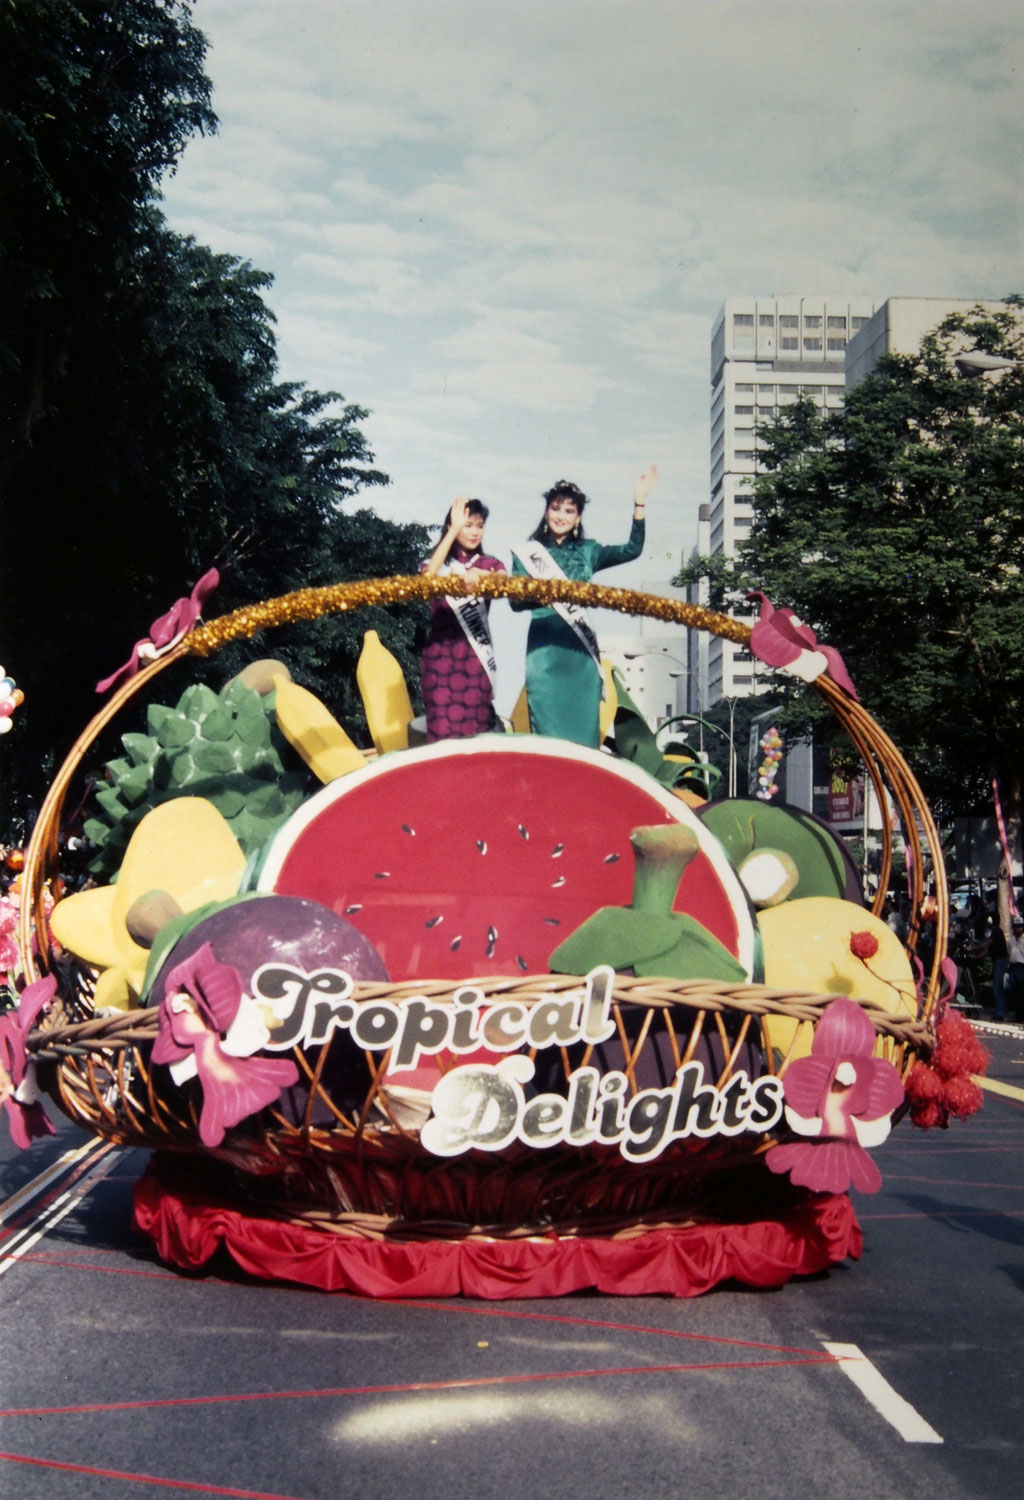 Image caption: Chingay float from 1987